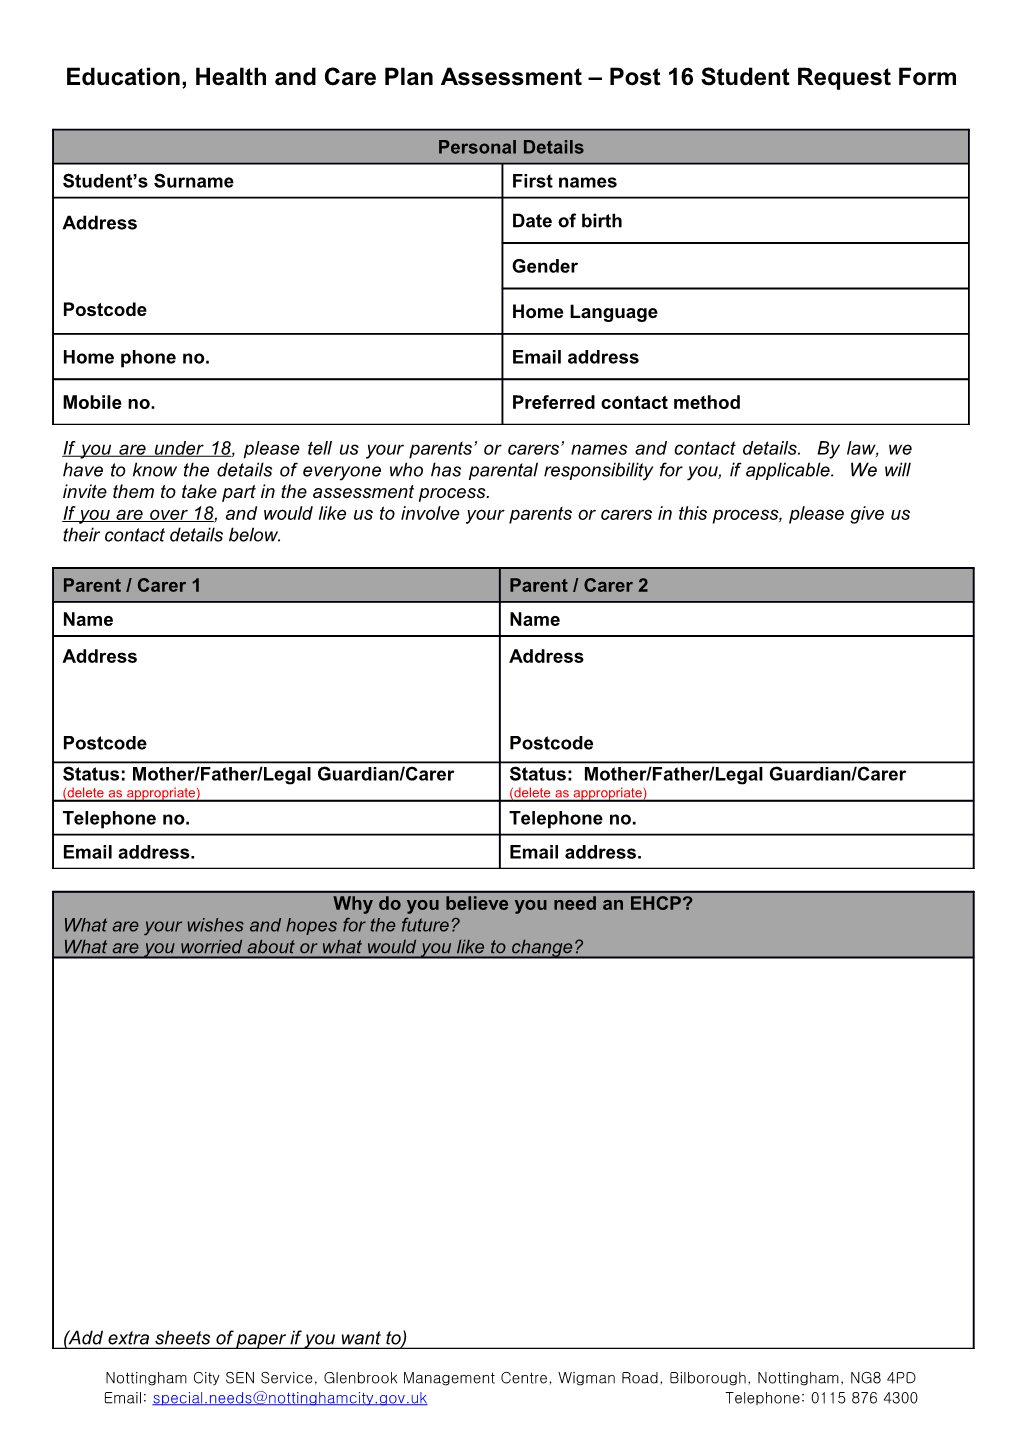 Education, Health and Care Plan Assessment Post 16 Student Request Form